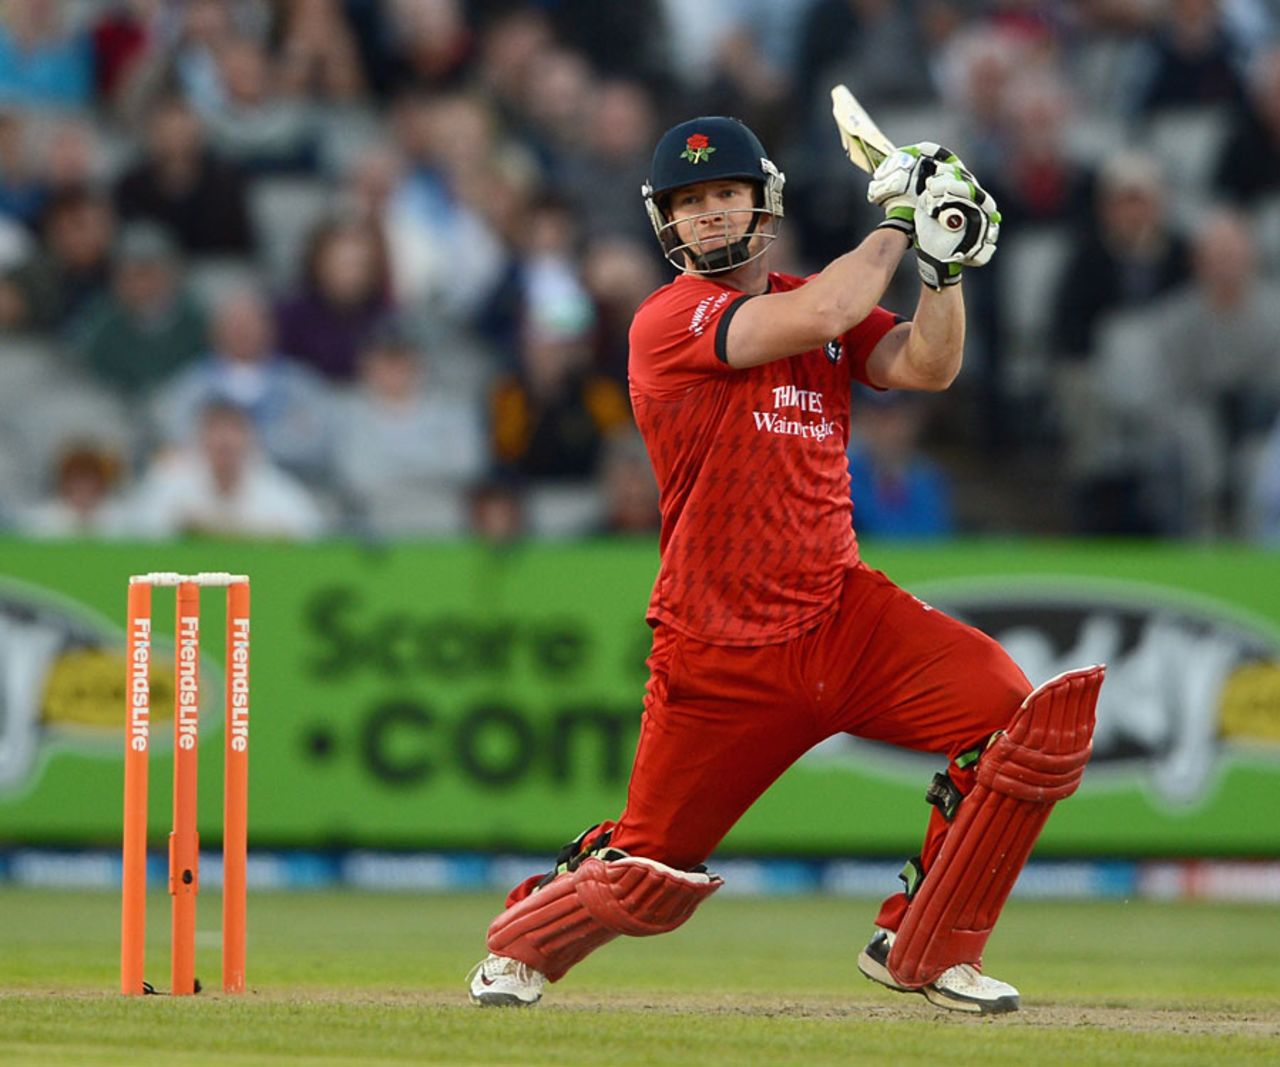 Steven Croft's unbeaten 65 guided Lancashire to a comfortable win, Lancashire v Durham, FLt20, North Group, Old Trafford, June 25, 2012